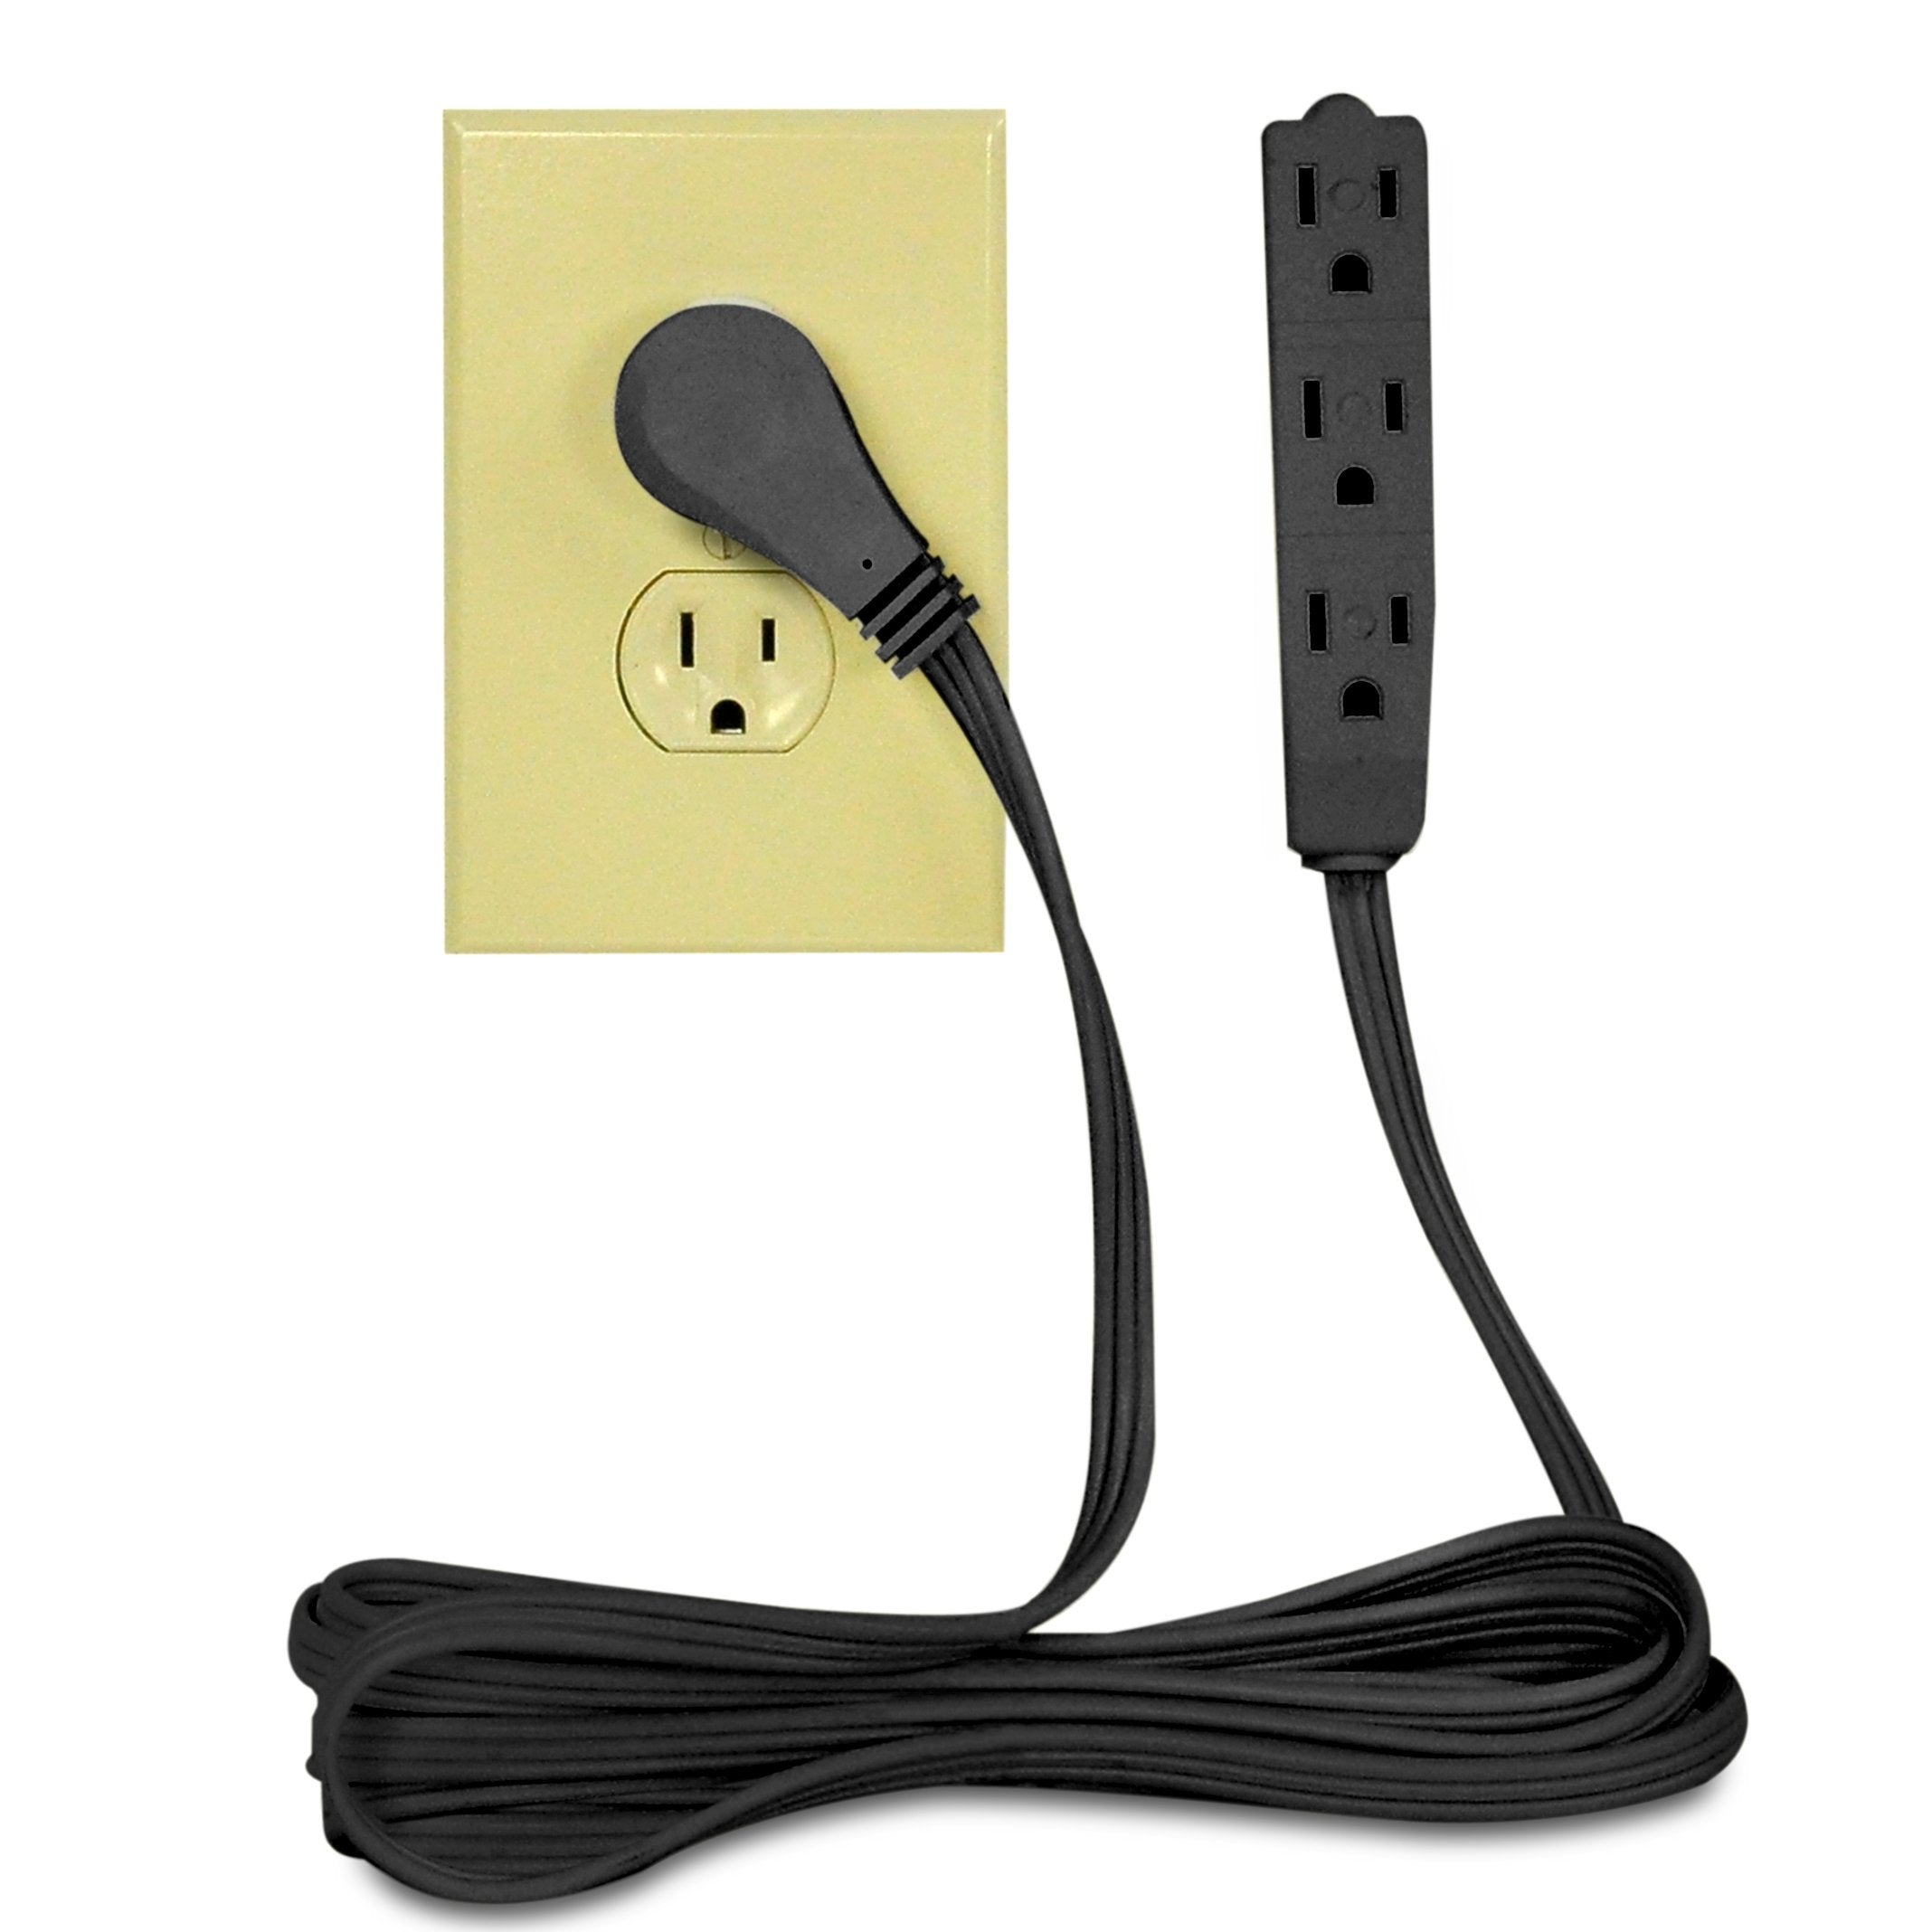 Flat Multiple Outlet Extension Cord for Indoor Use by Bindmaster- UL-Listed 3-Prong Multi Extension Wire- Space-Saving Flat Angled Extension Cord- Black  - Very Good